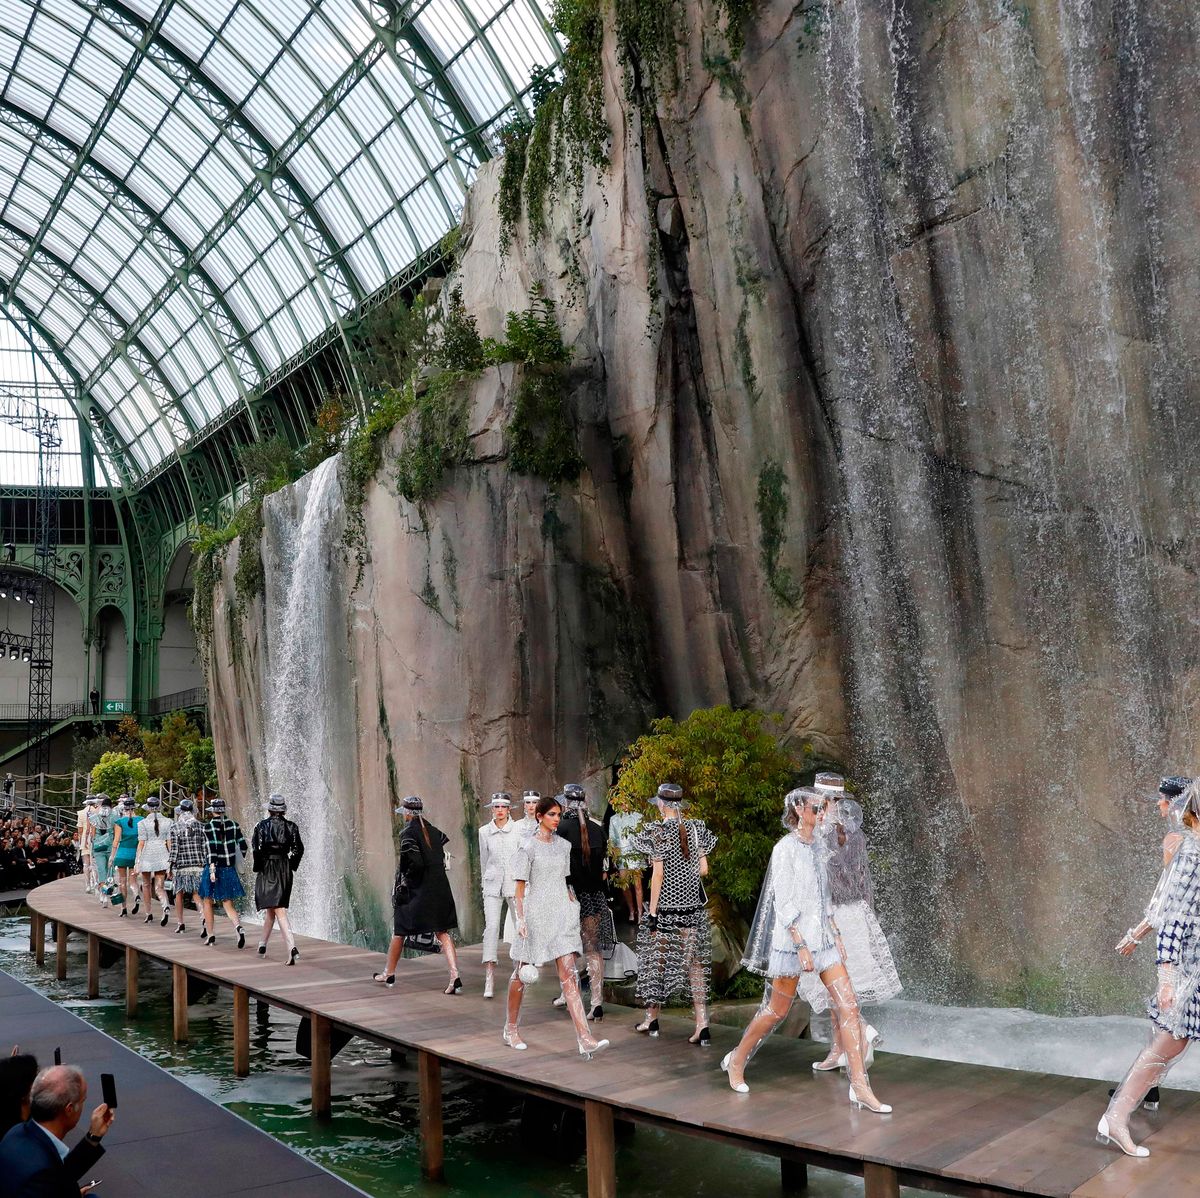 Chanel will contribute €25 million to help renovate the Grand Palais